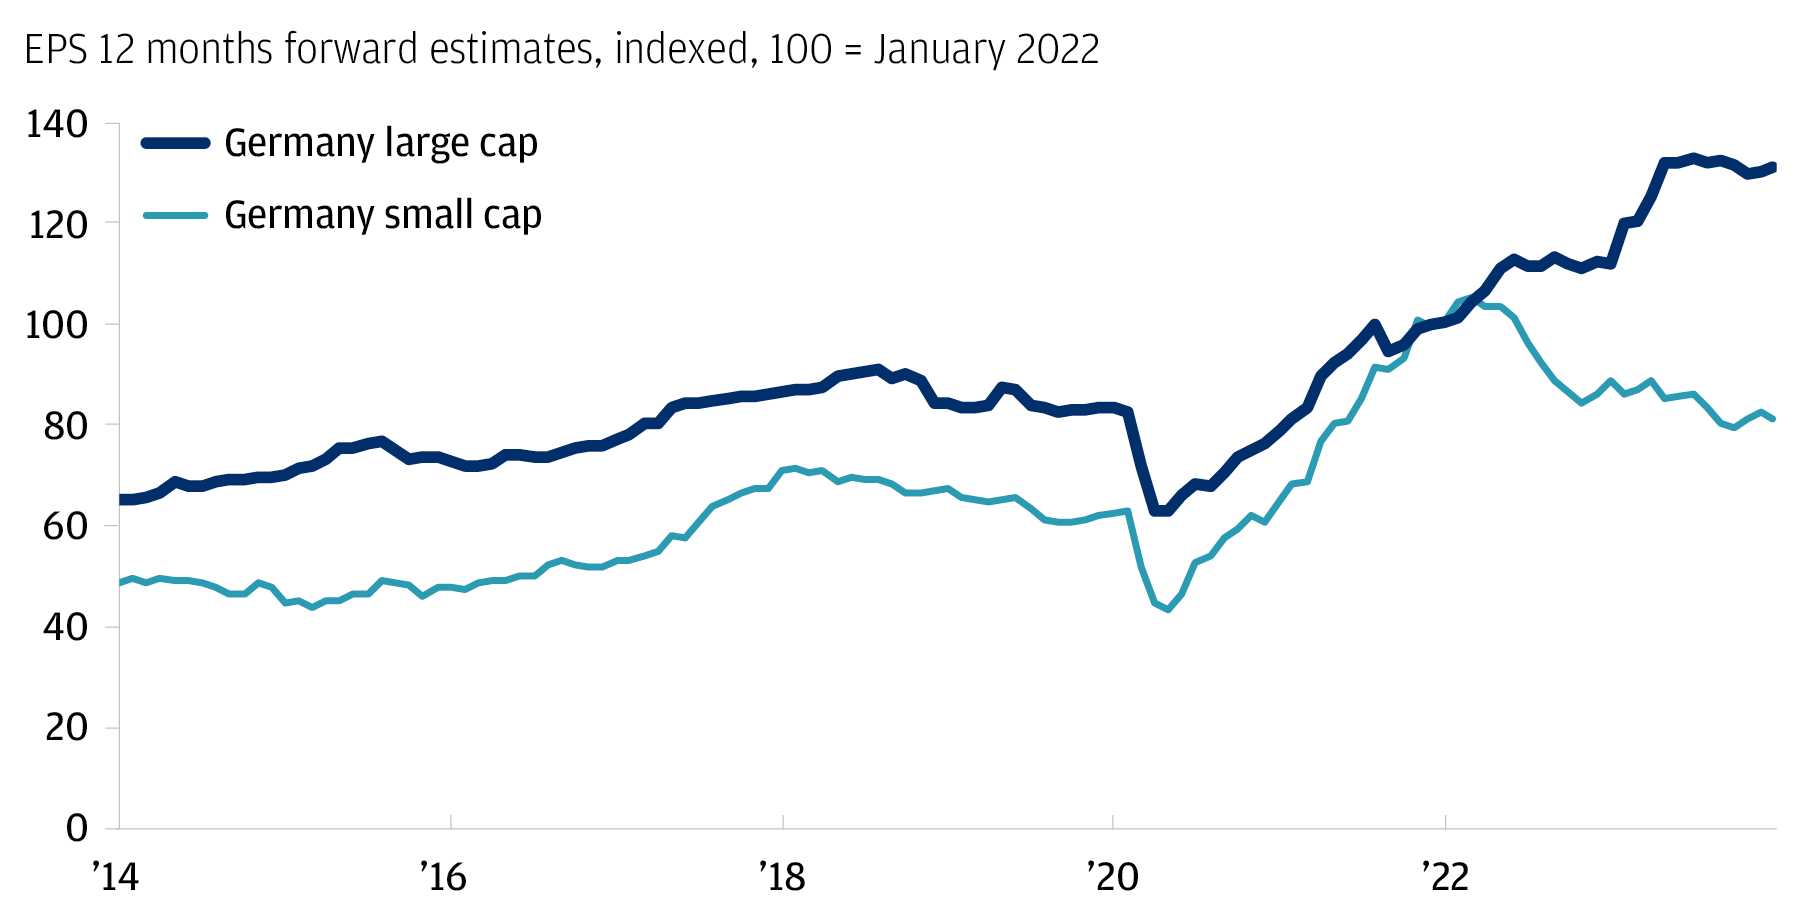 The chart describes the EPS 12 months forward estimates for Germany Small Cap and Germany Large Cap with January 2022 indexed at 100.